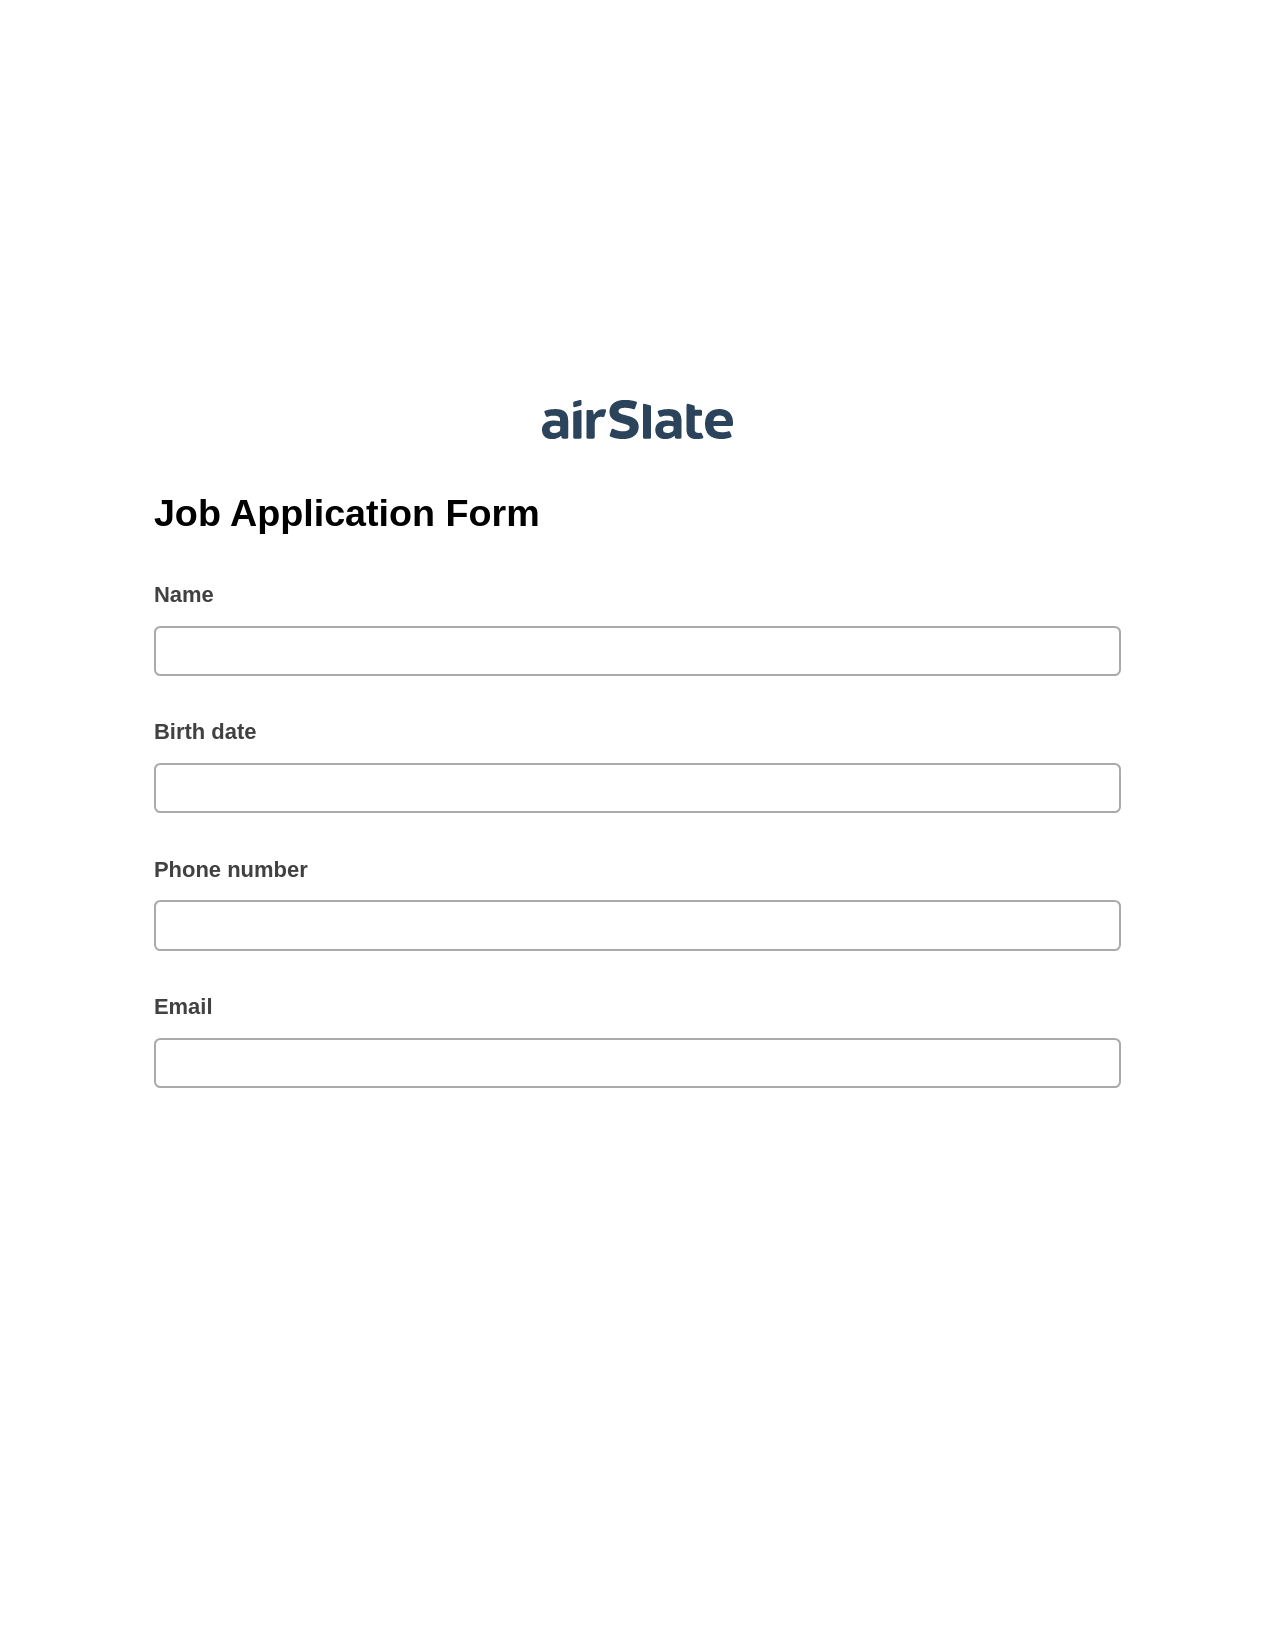 Multirole Job Application Form Pre-fill Document Bot, Assign Roles to Recipients Bot, Export to Google Sheet Bot